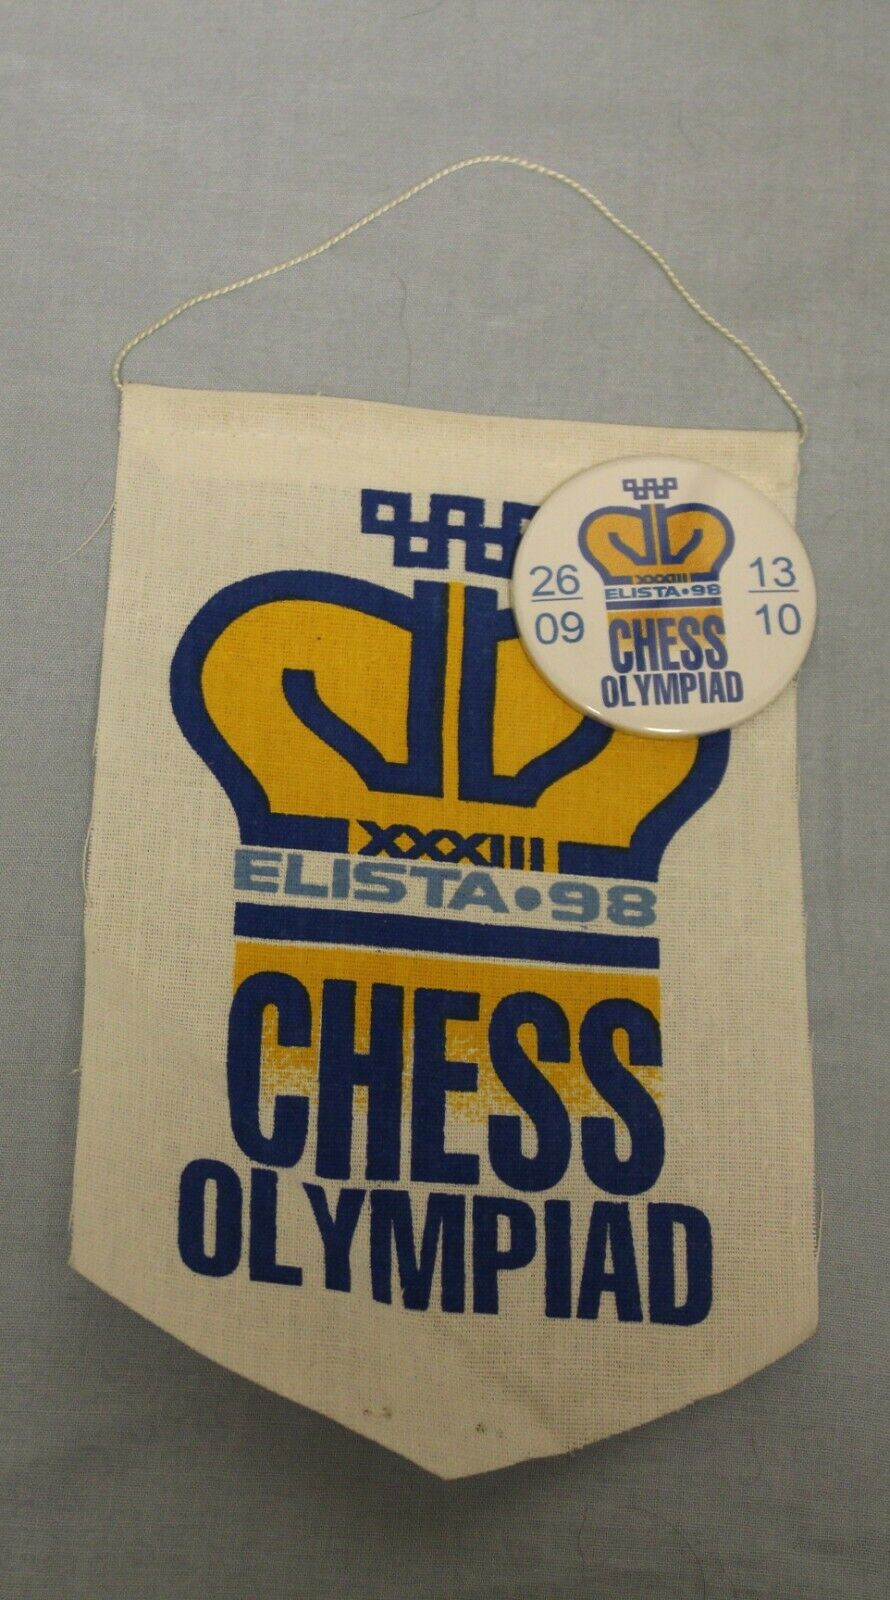 11222.Chess Set: pennant and pin of  3 Chess Olympiad in Elista 1998